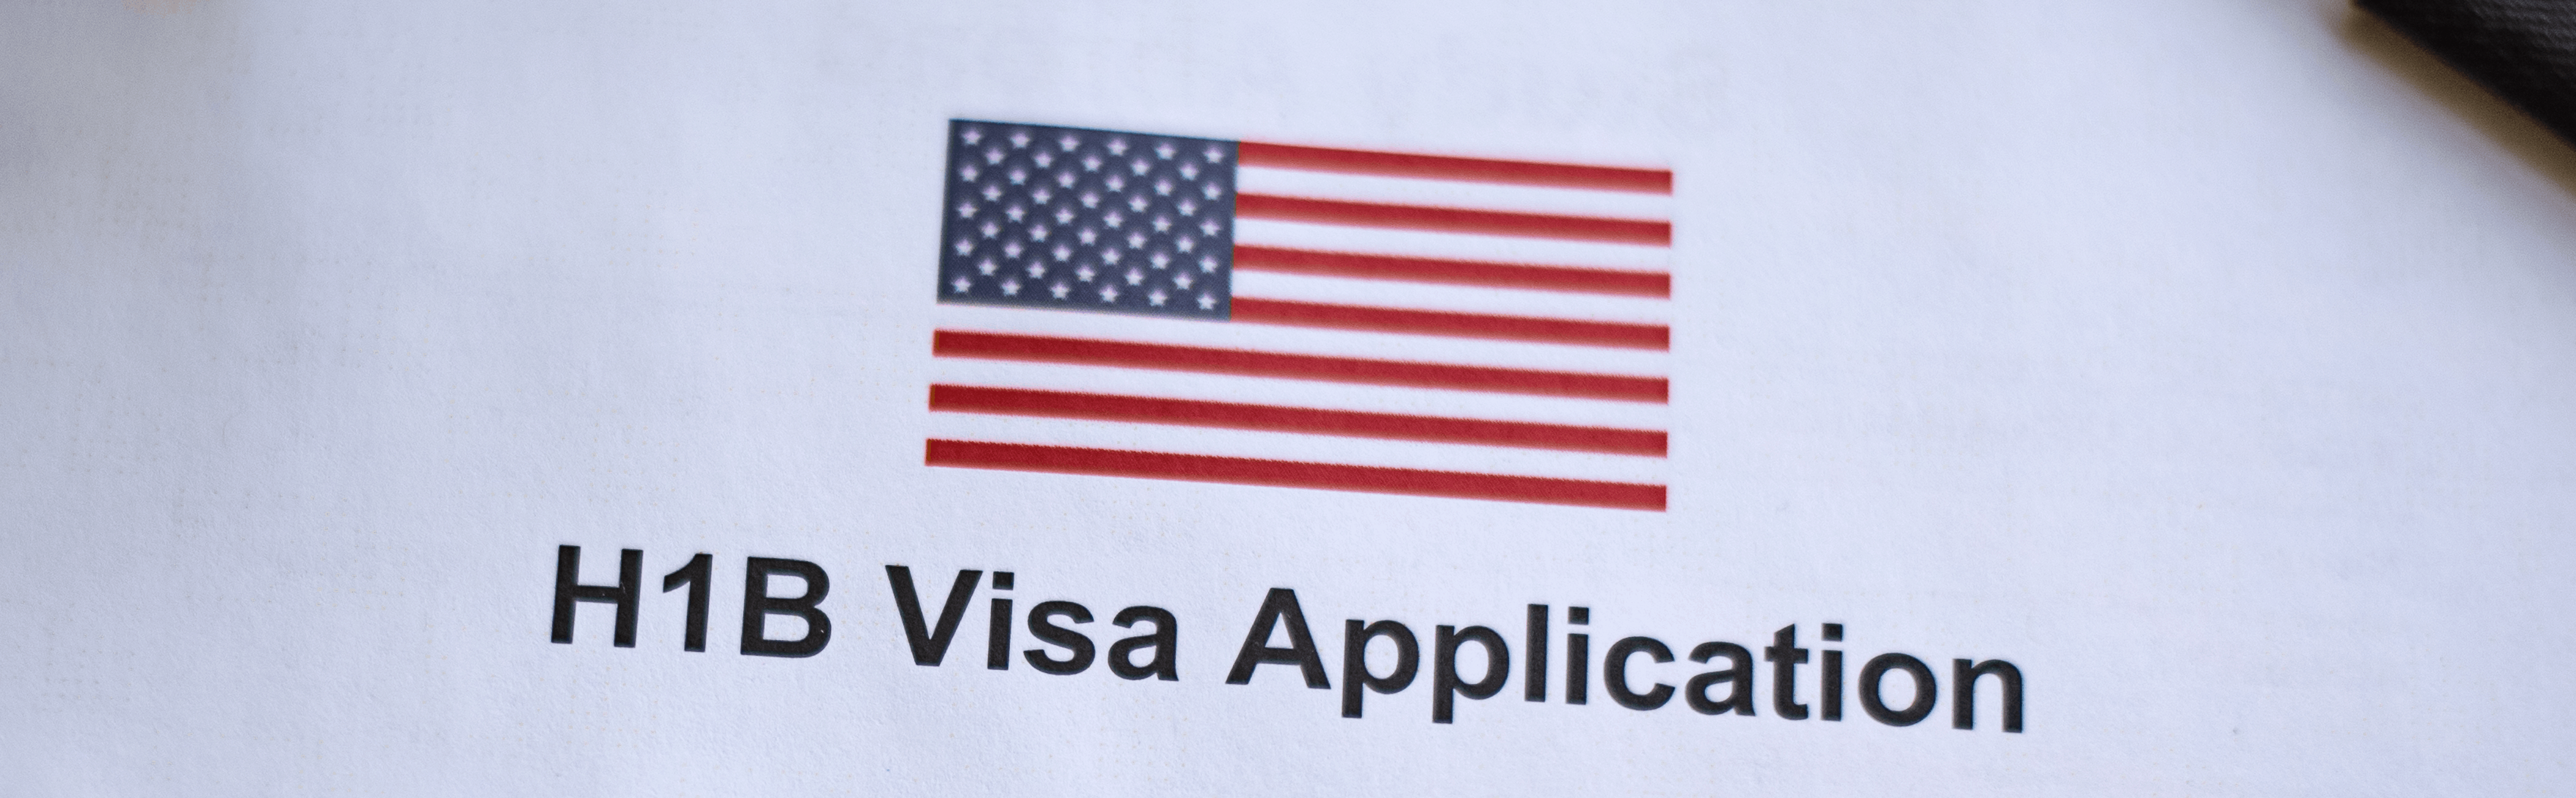 A close up of the usa flag on a visa application